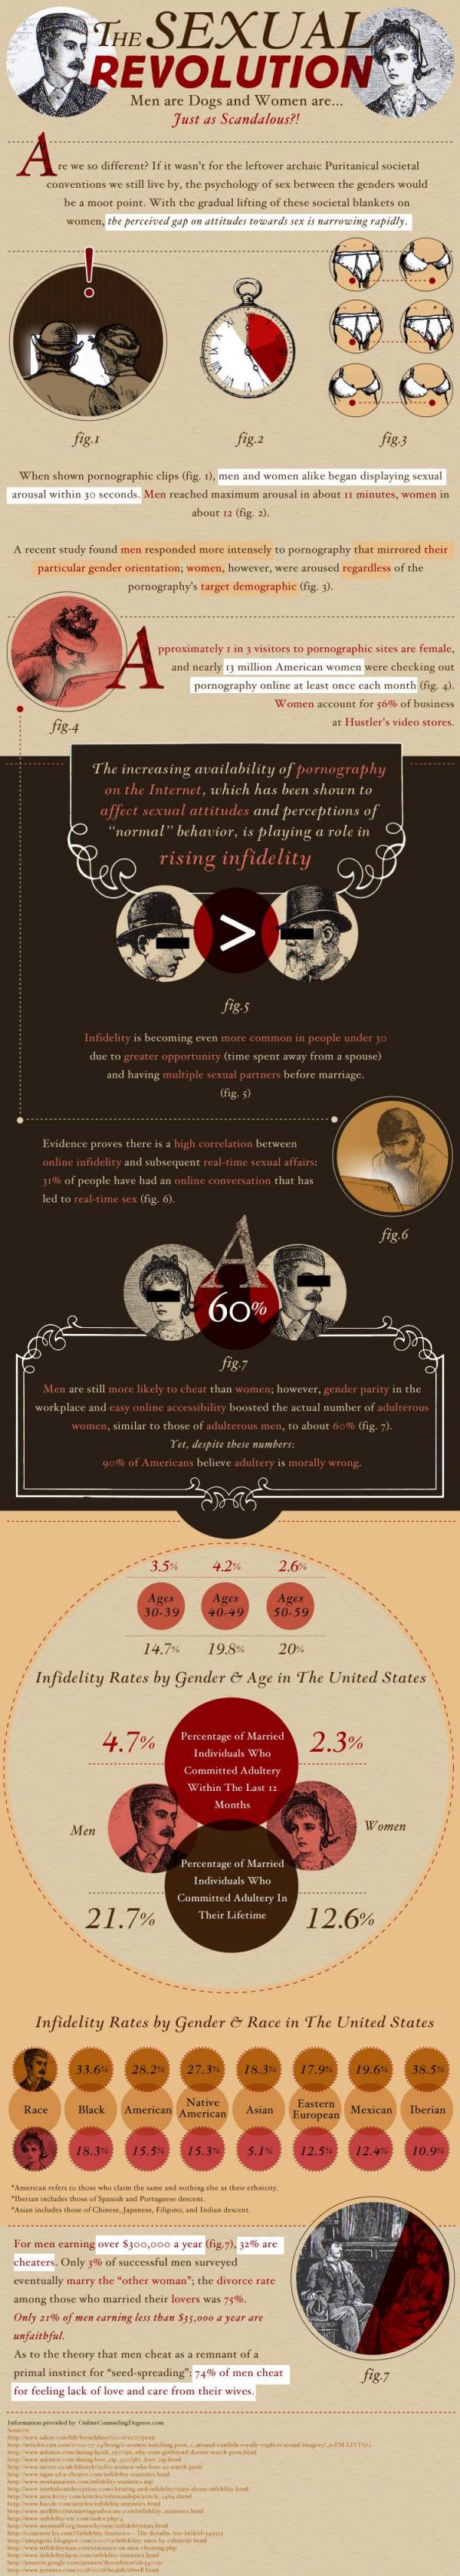 The Sexual Revolution (Infographic)